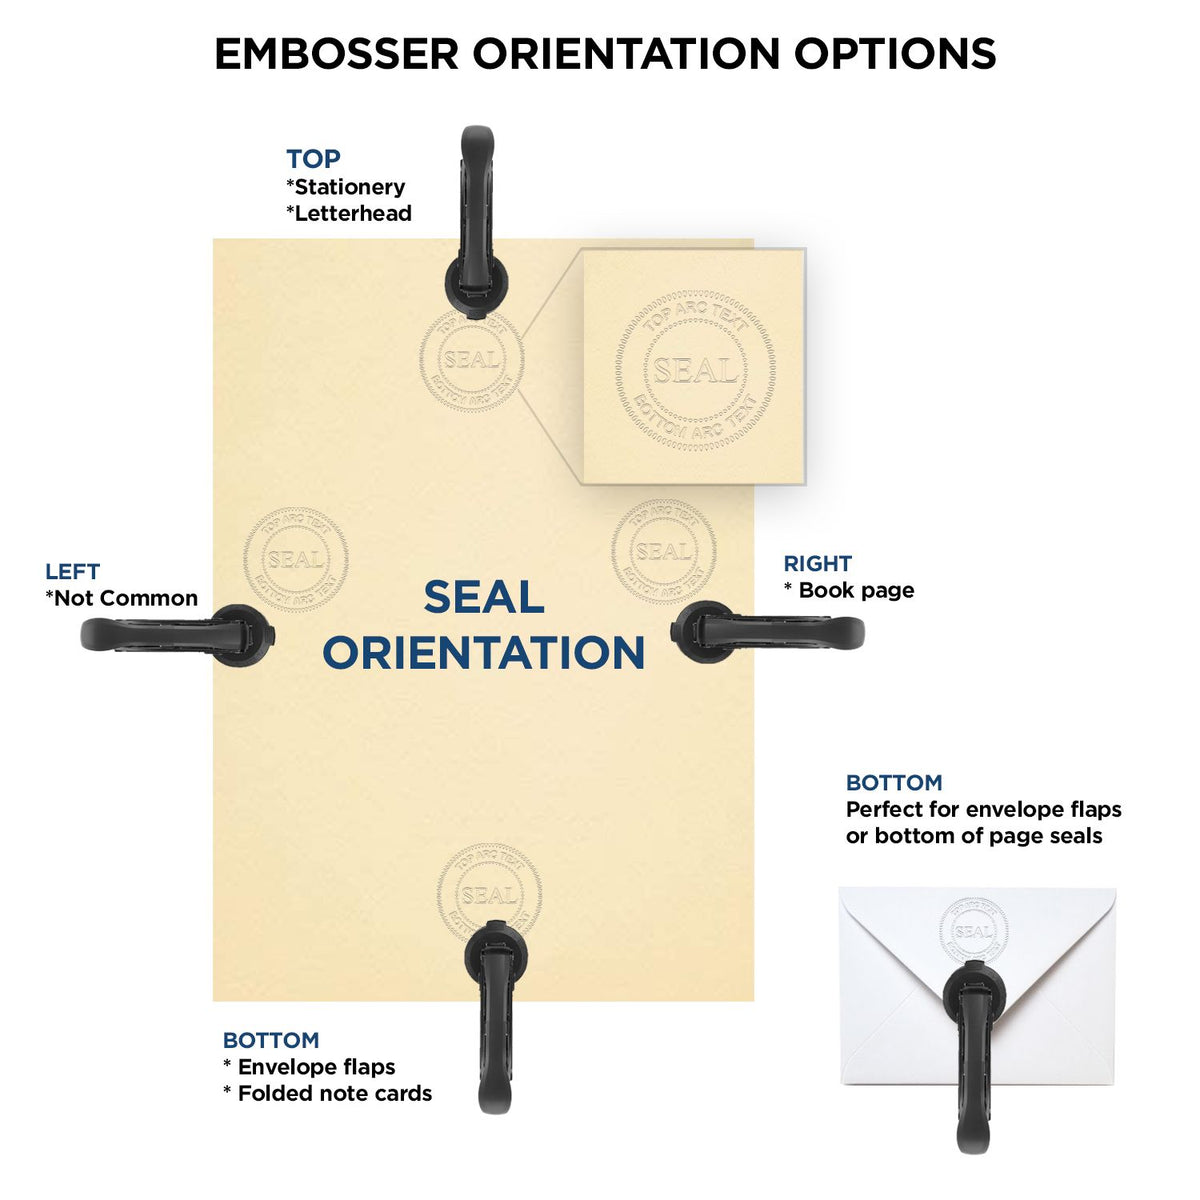 An infographic for the Handheld Pennsylvania Professional Geologist Embosser showing embosser orientation, this is showing examples of a top, bottom, right and left insert.